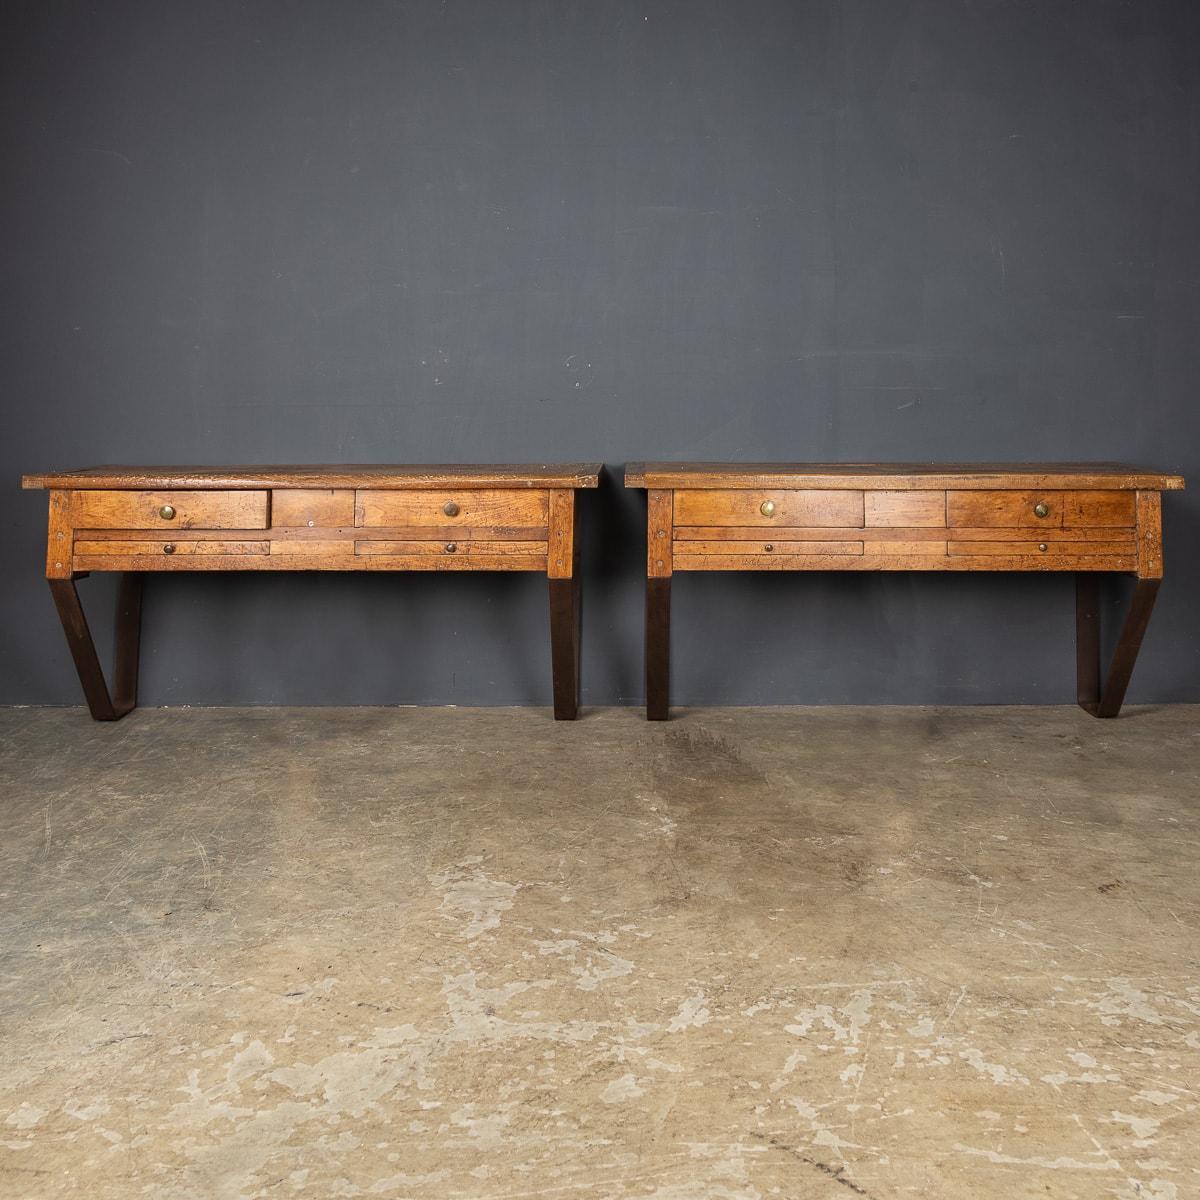 Antique 20th century French pair of jewellery makers work benches, in walnut with four drawers and a supporting metal legs.

Condition
In Good Condition - wear consistent with age.

Size
Height: 71cm
Width: 147cm
Depth: 49cm.